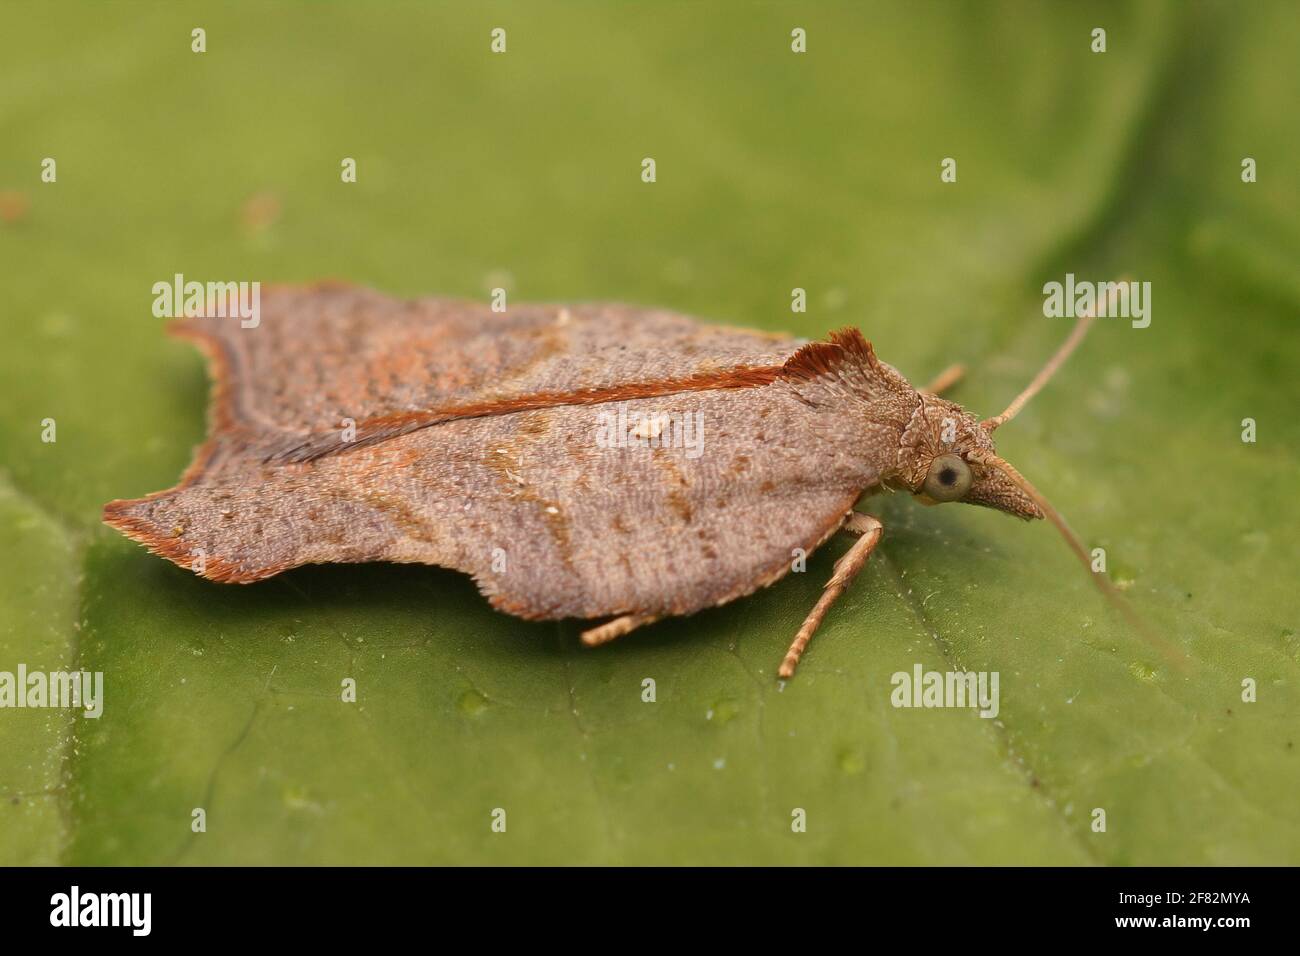 A closeup shot of a small brown tortricid moth on a green leaf Stock Photo